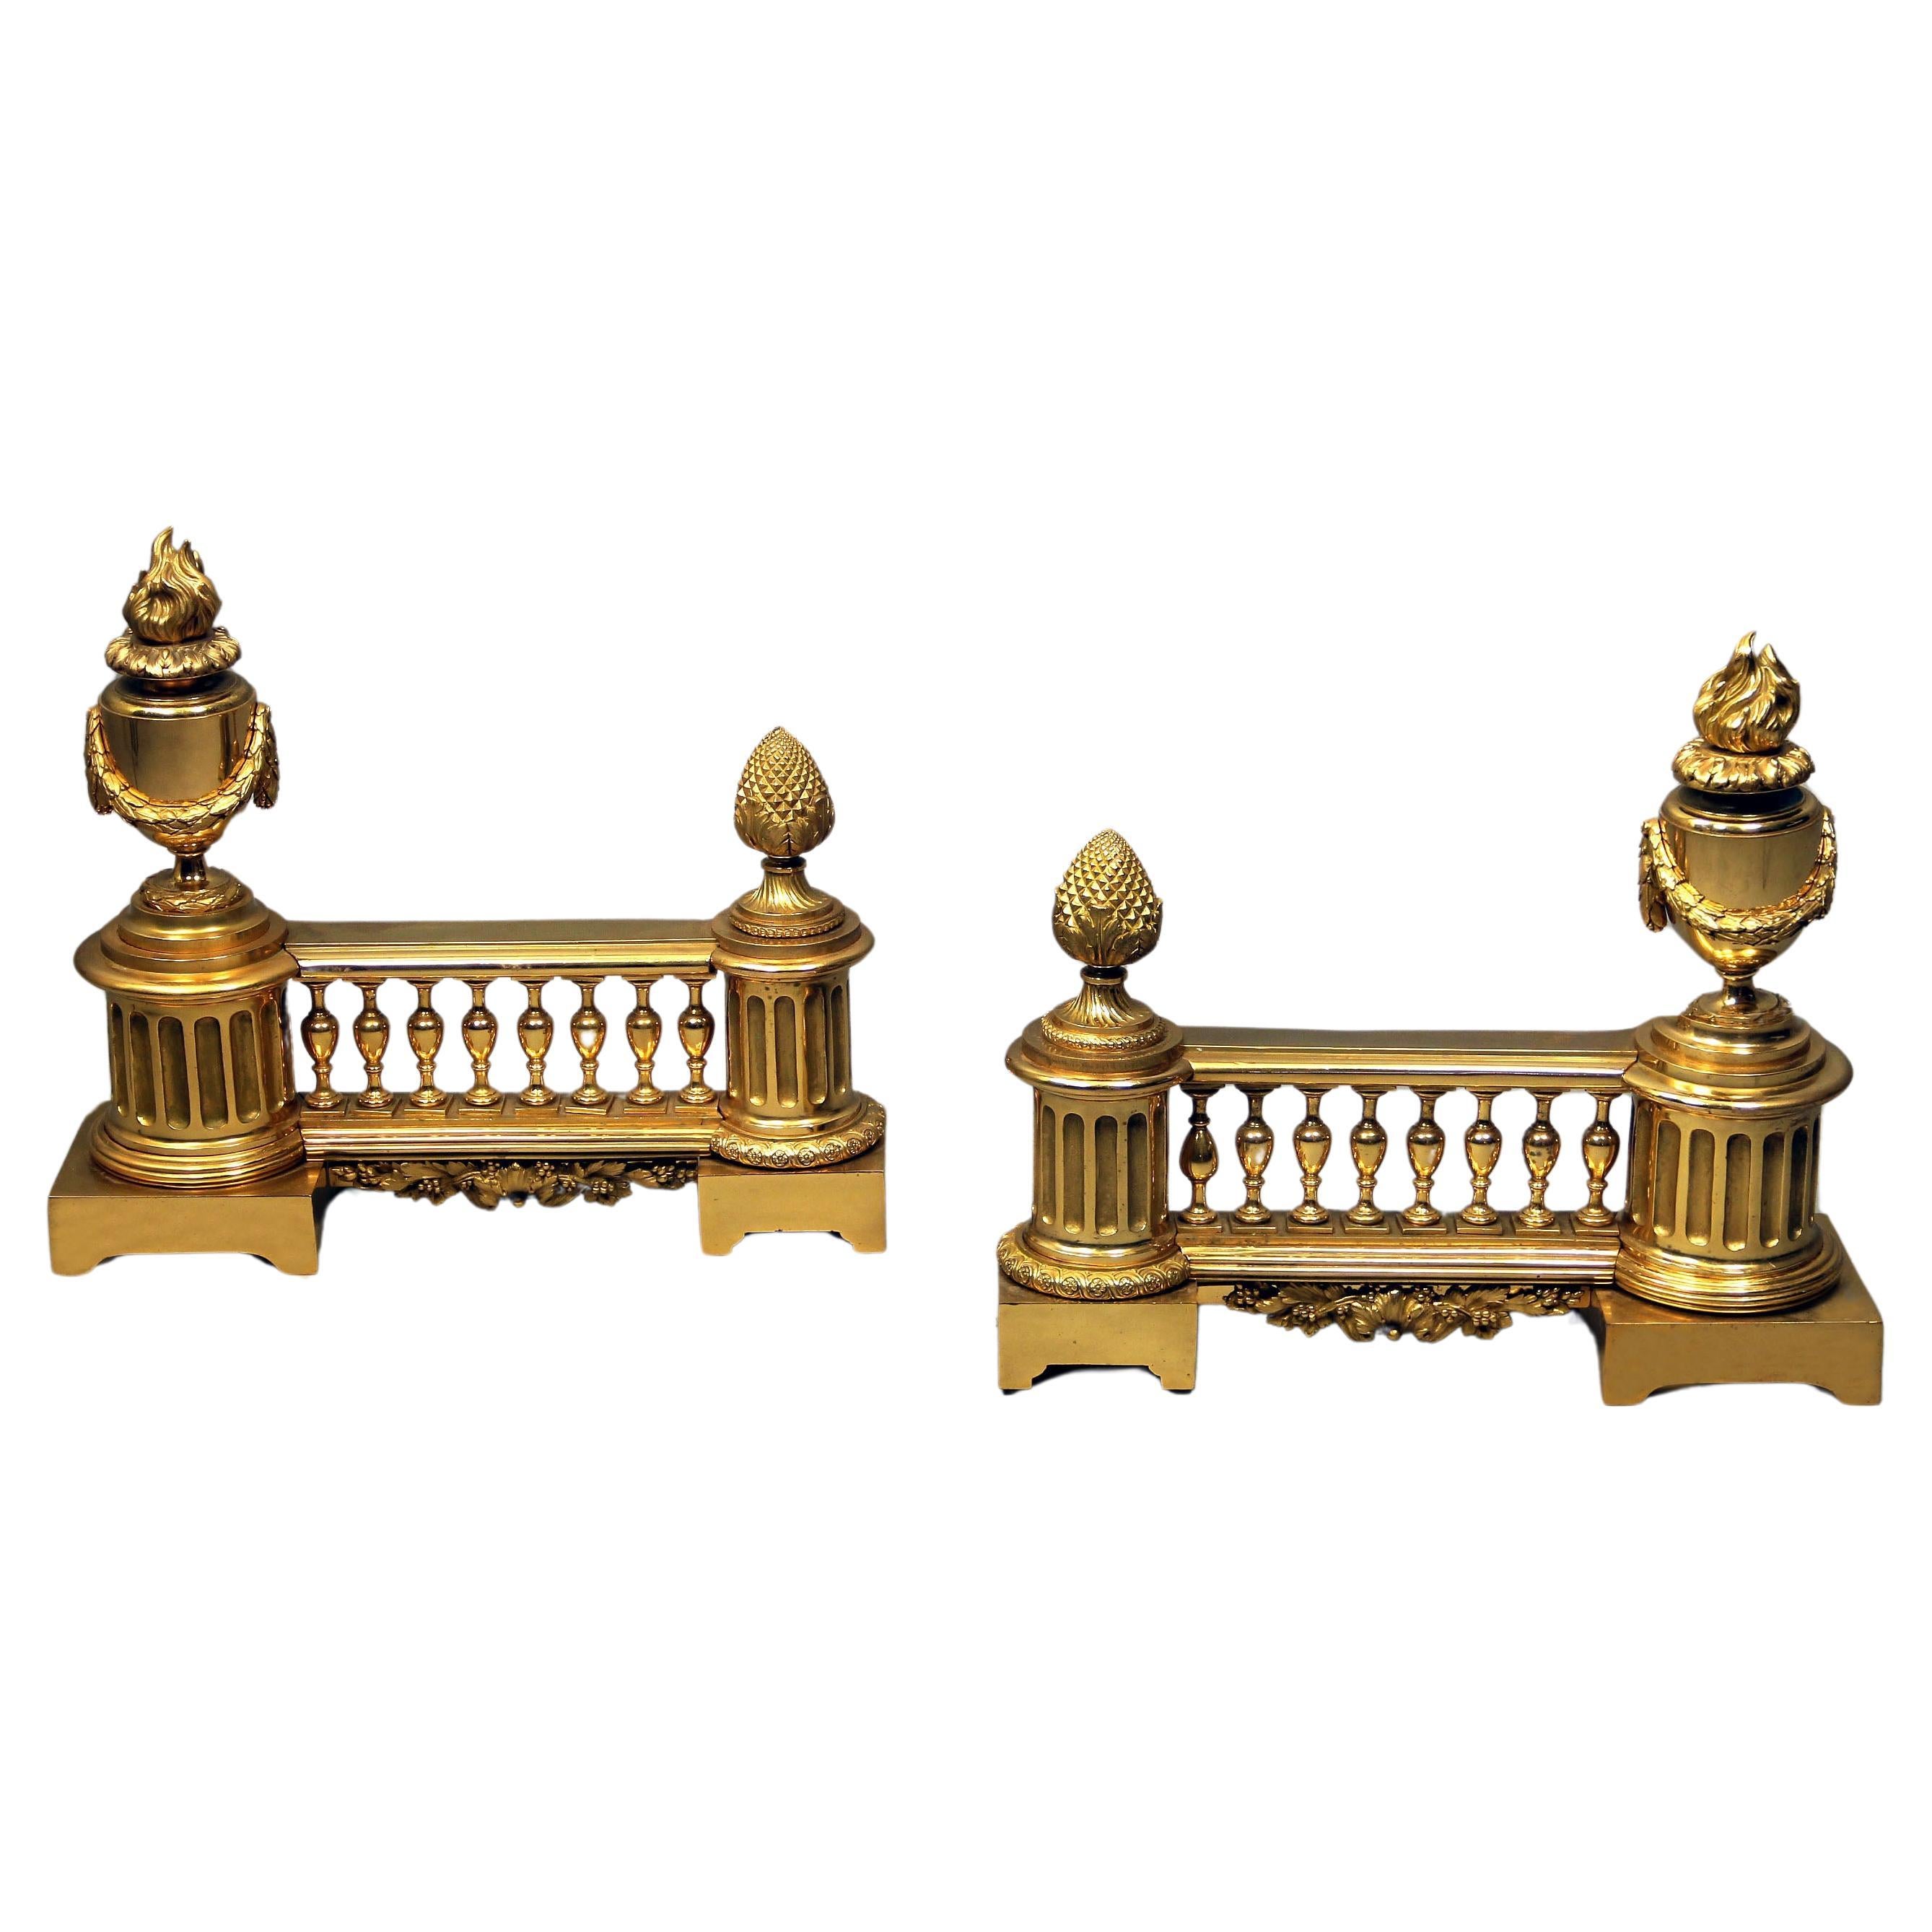 A Nice Pair of Late 19th Century Gilt Bronze Chenets